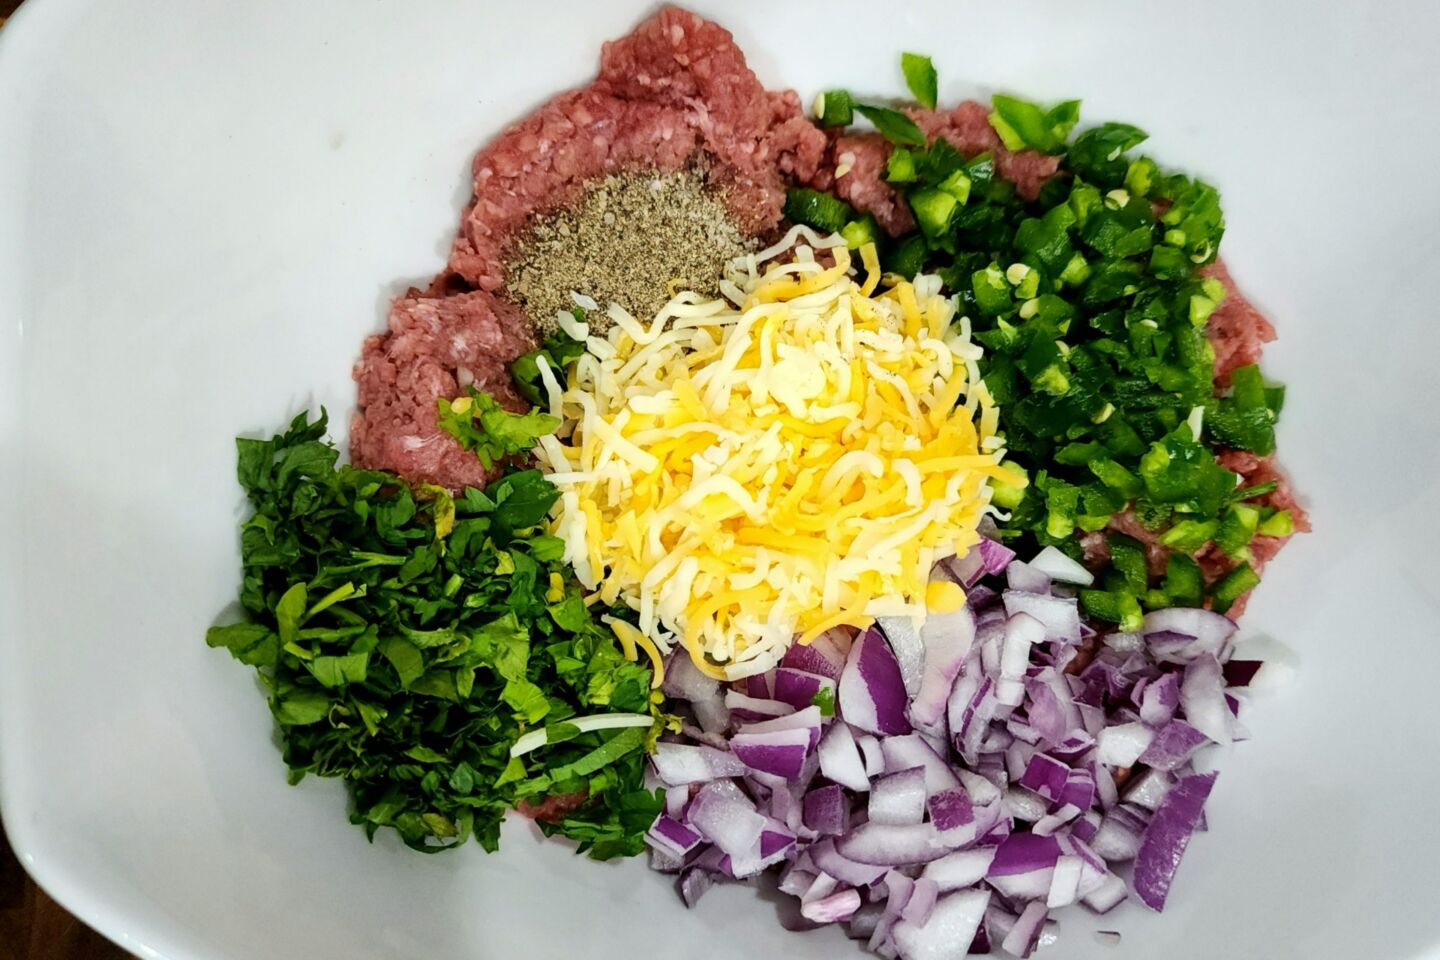 Step 3 Mix the ground beef, chopped onion, cheddar cheese, diced jalapeno, chopped parsley, and salt and pepper in a bowl.